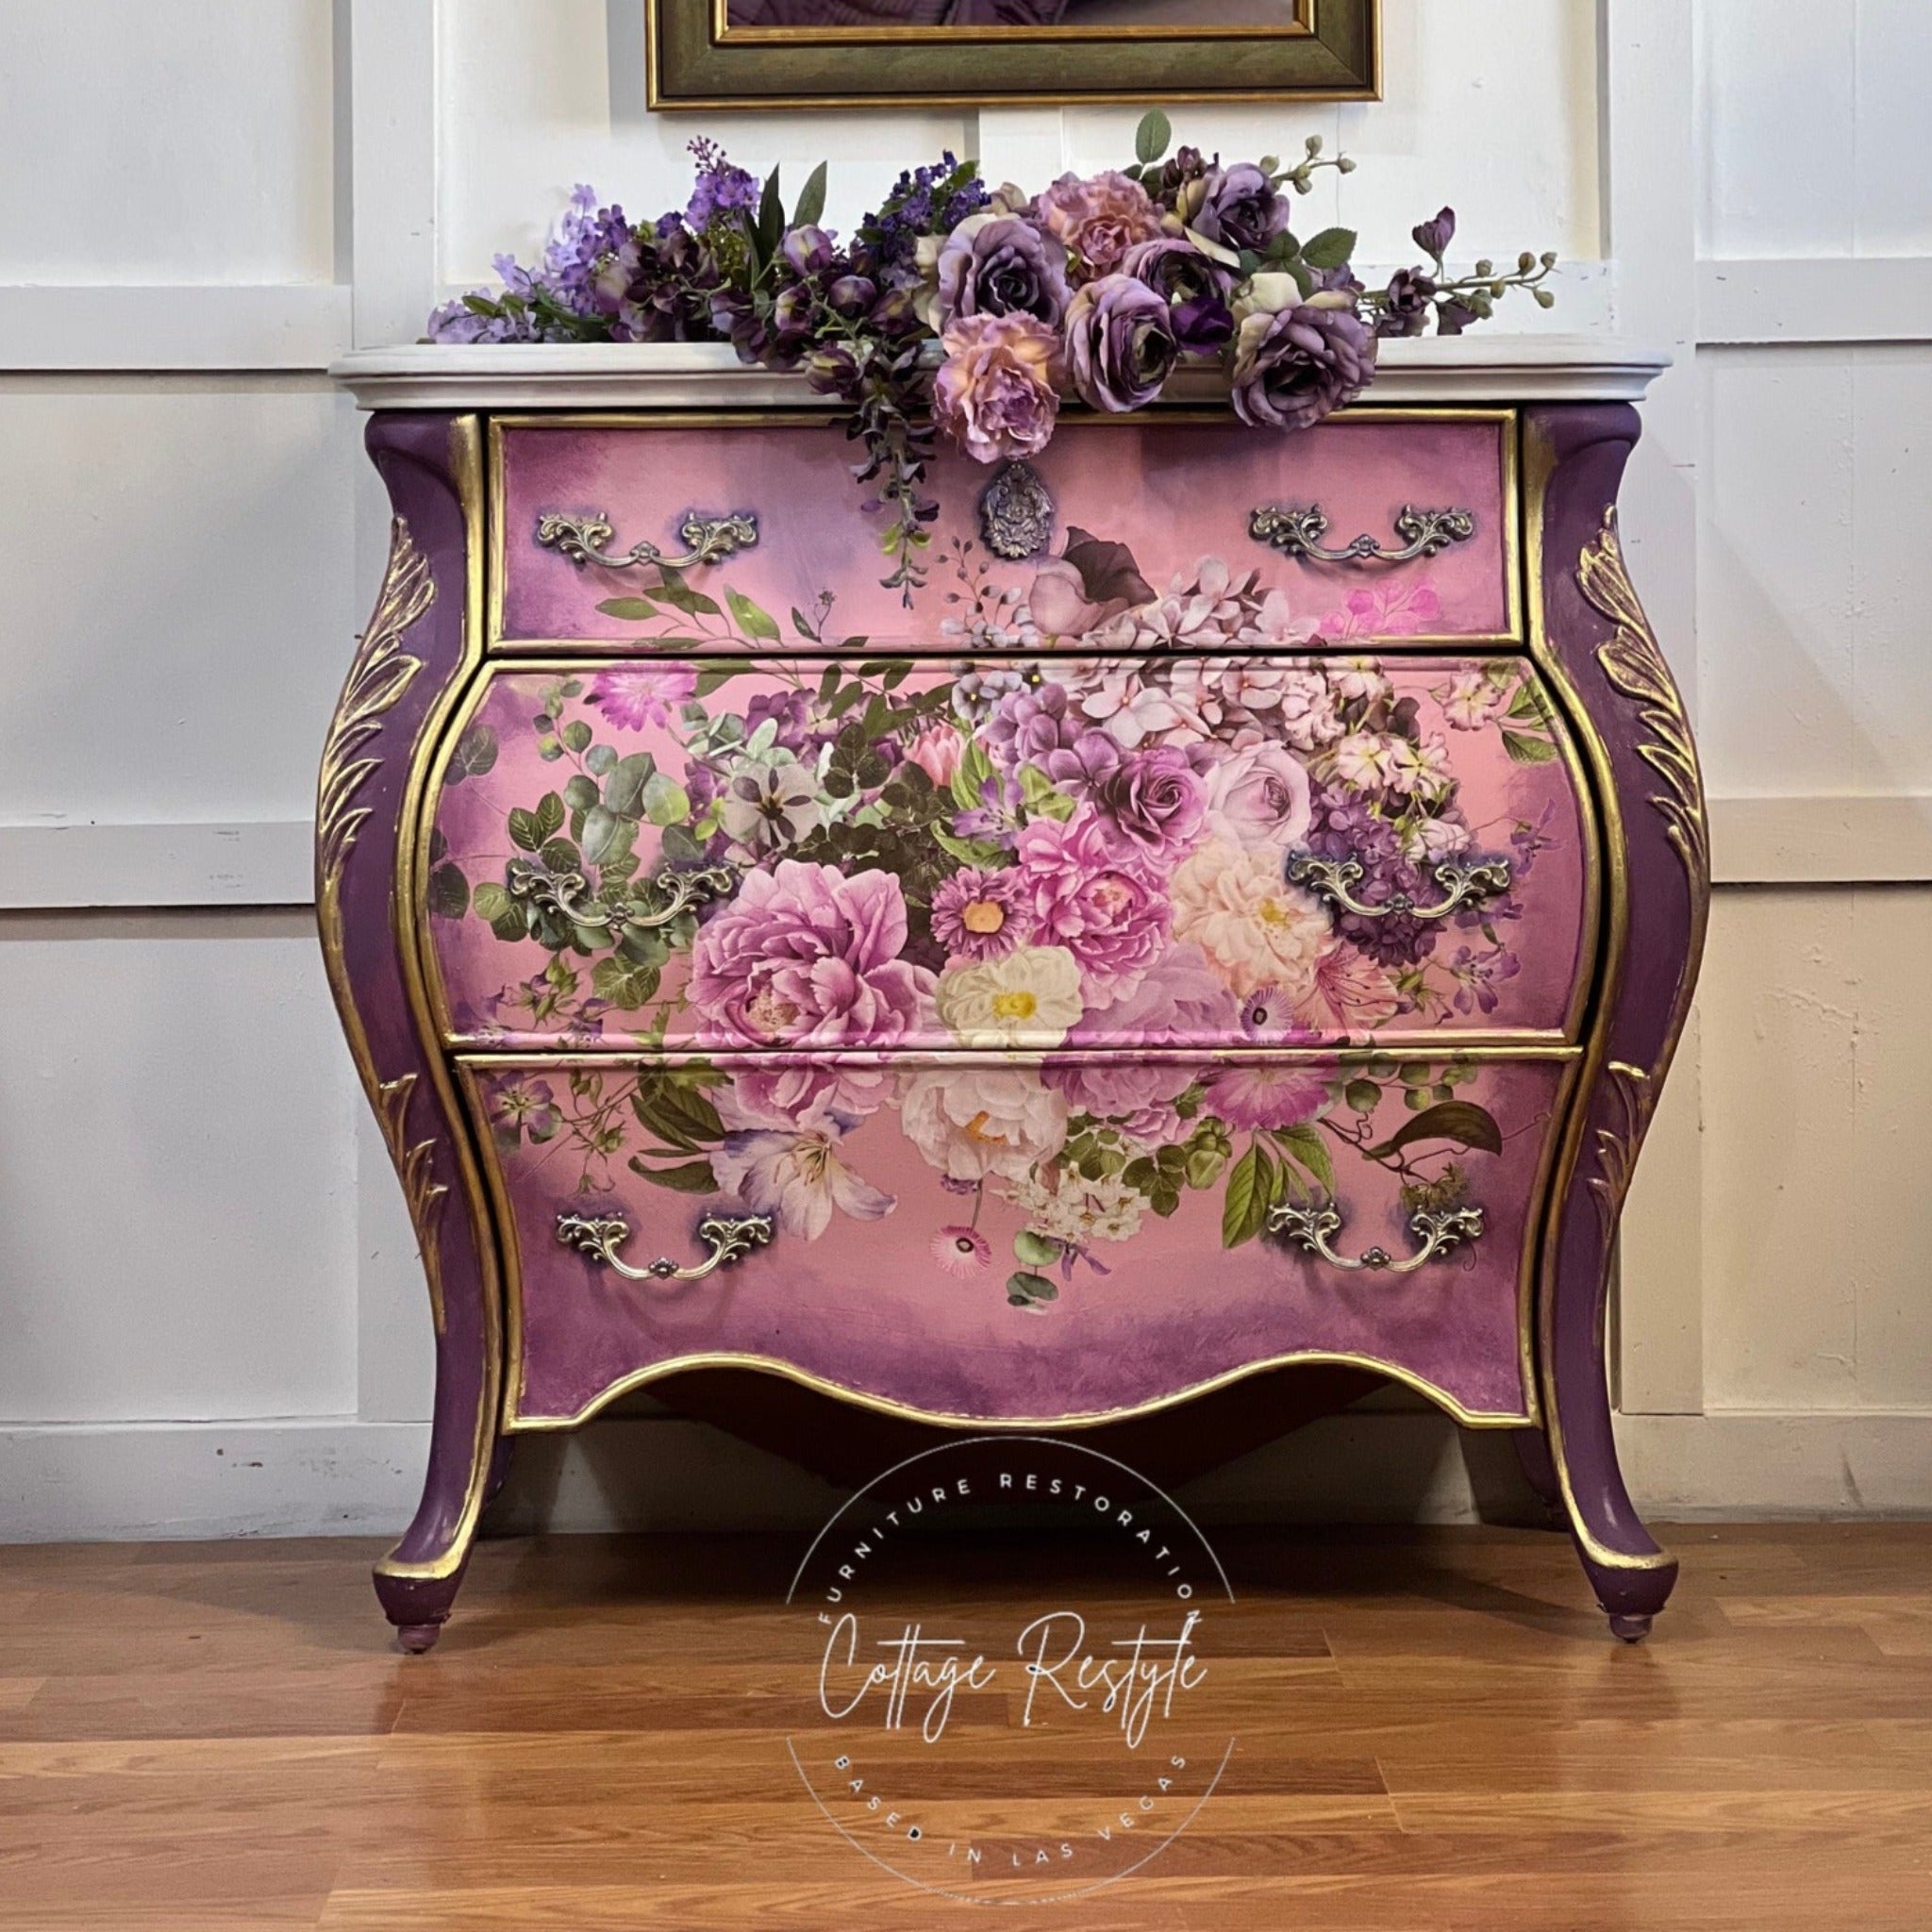 A vintage Bombay 3 drawer dresser refurbished by Cottage Restyle is painted purple with gold accents on the legs that run up the sides of the dresser and a blend of light pink and purple on the drawers. The center of the drawers feature ReDesign with Prima's Kacha Morning Purple transfer on them.